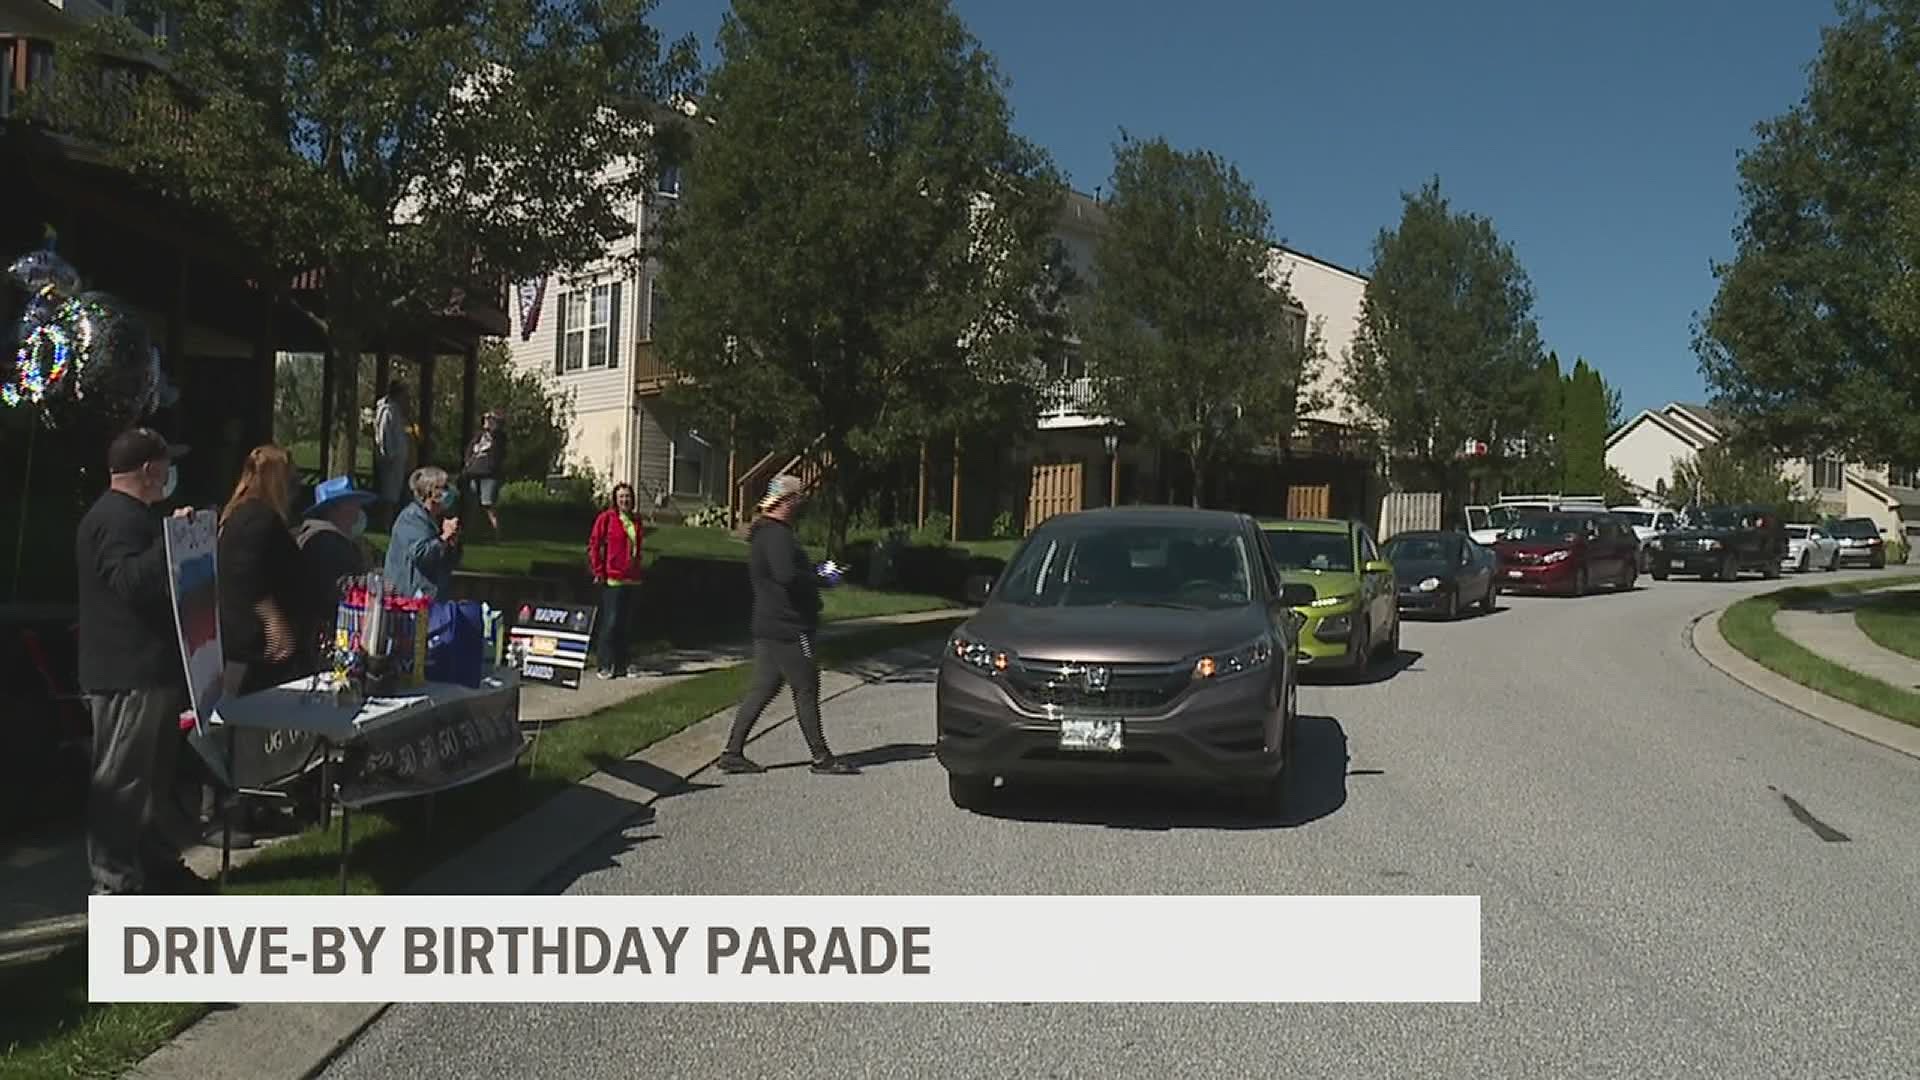 Community showed up to surprise Michael Fink on his 50th birthday